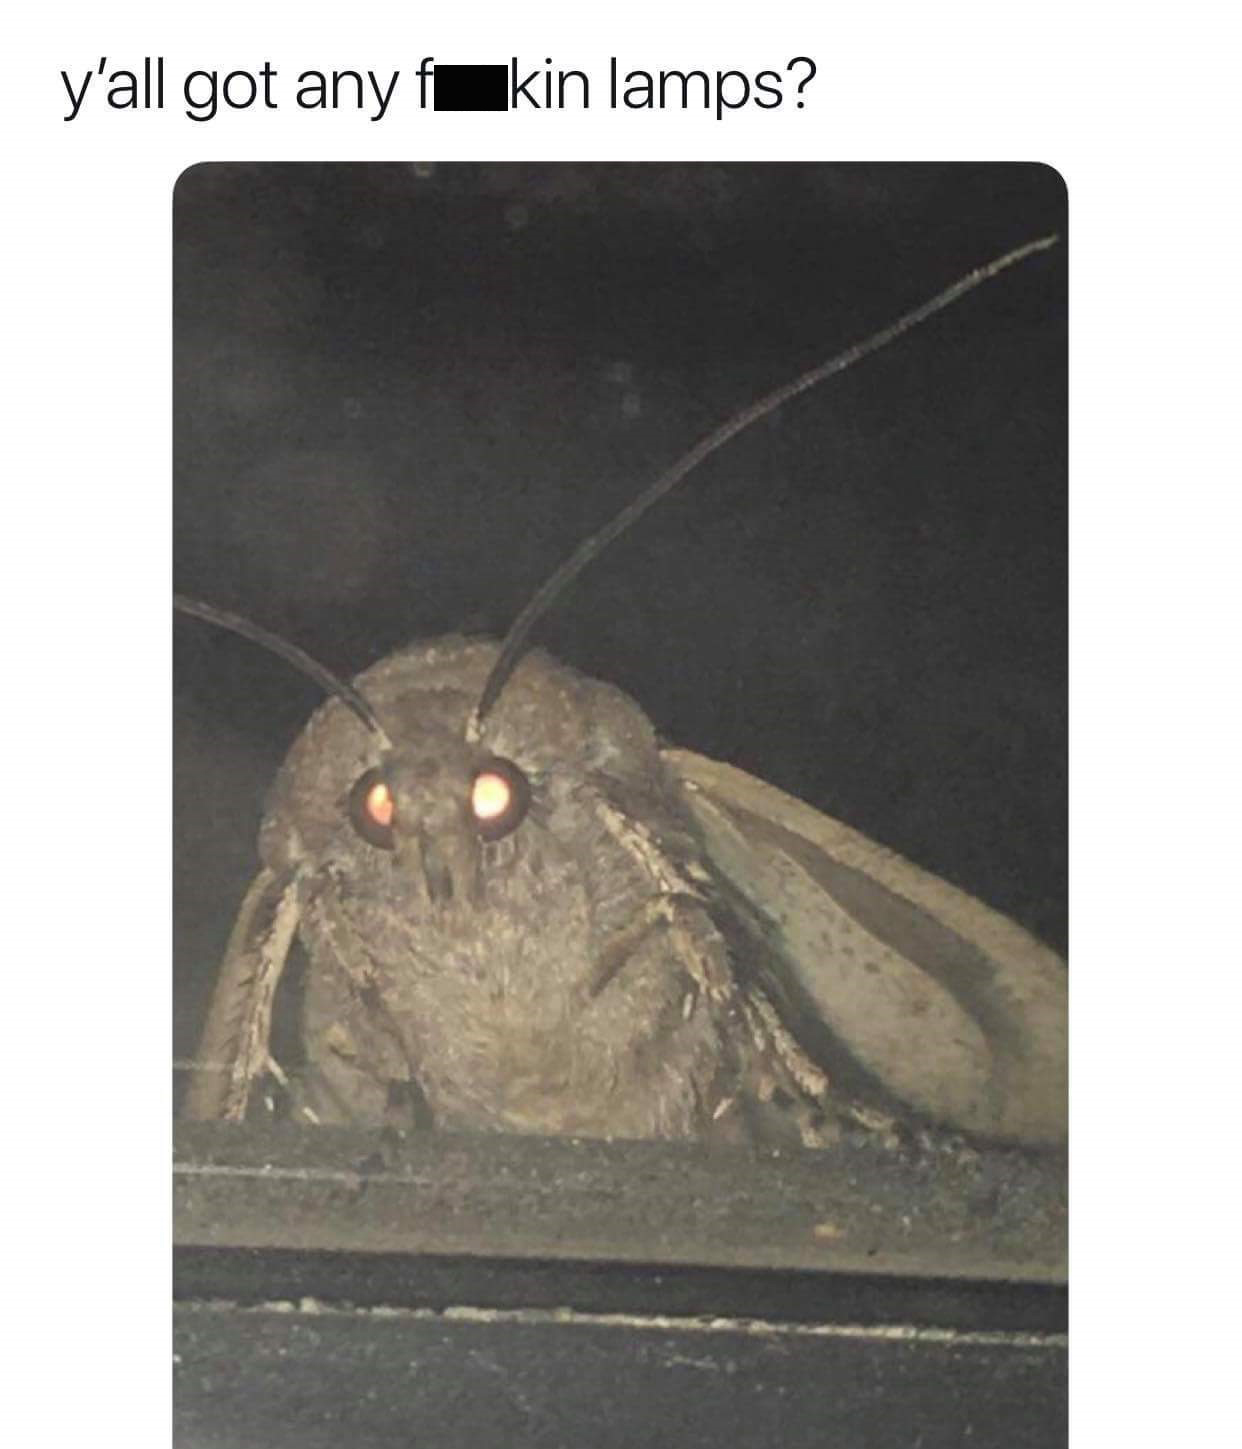 funny pictures -funny moth meme - y'all got any fkin lamps?